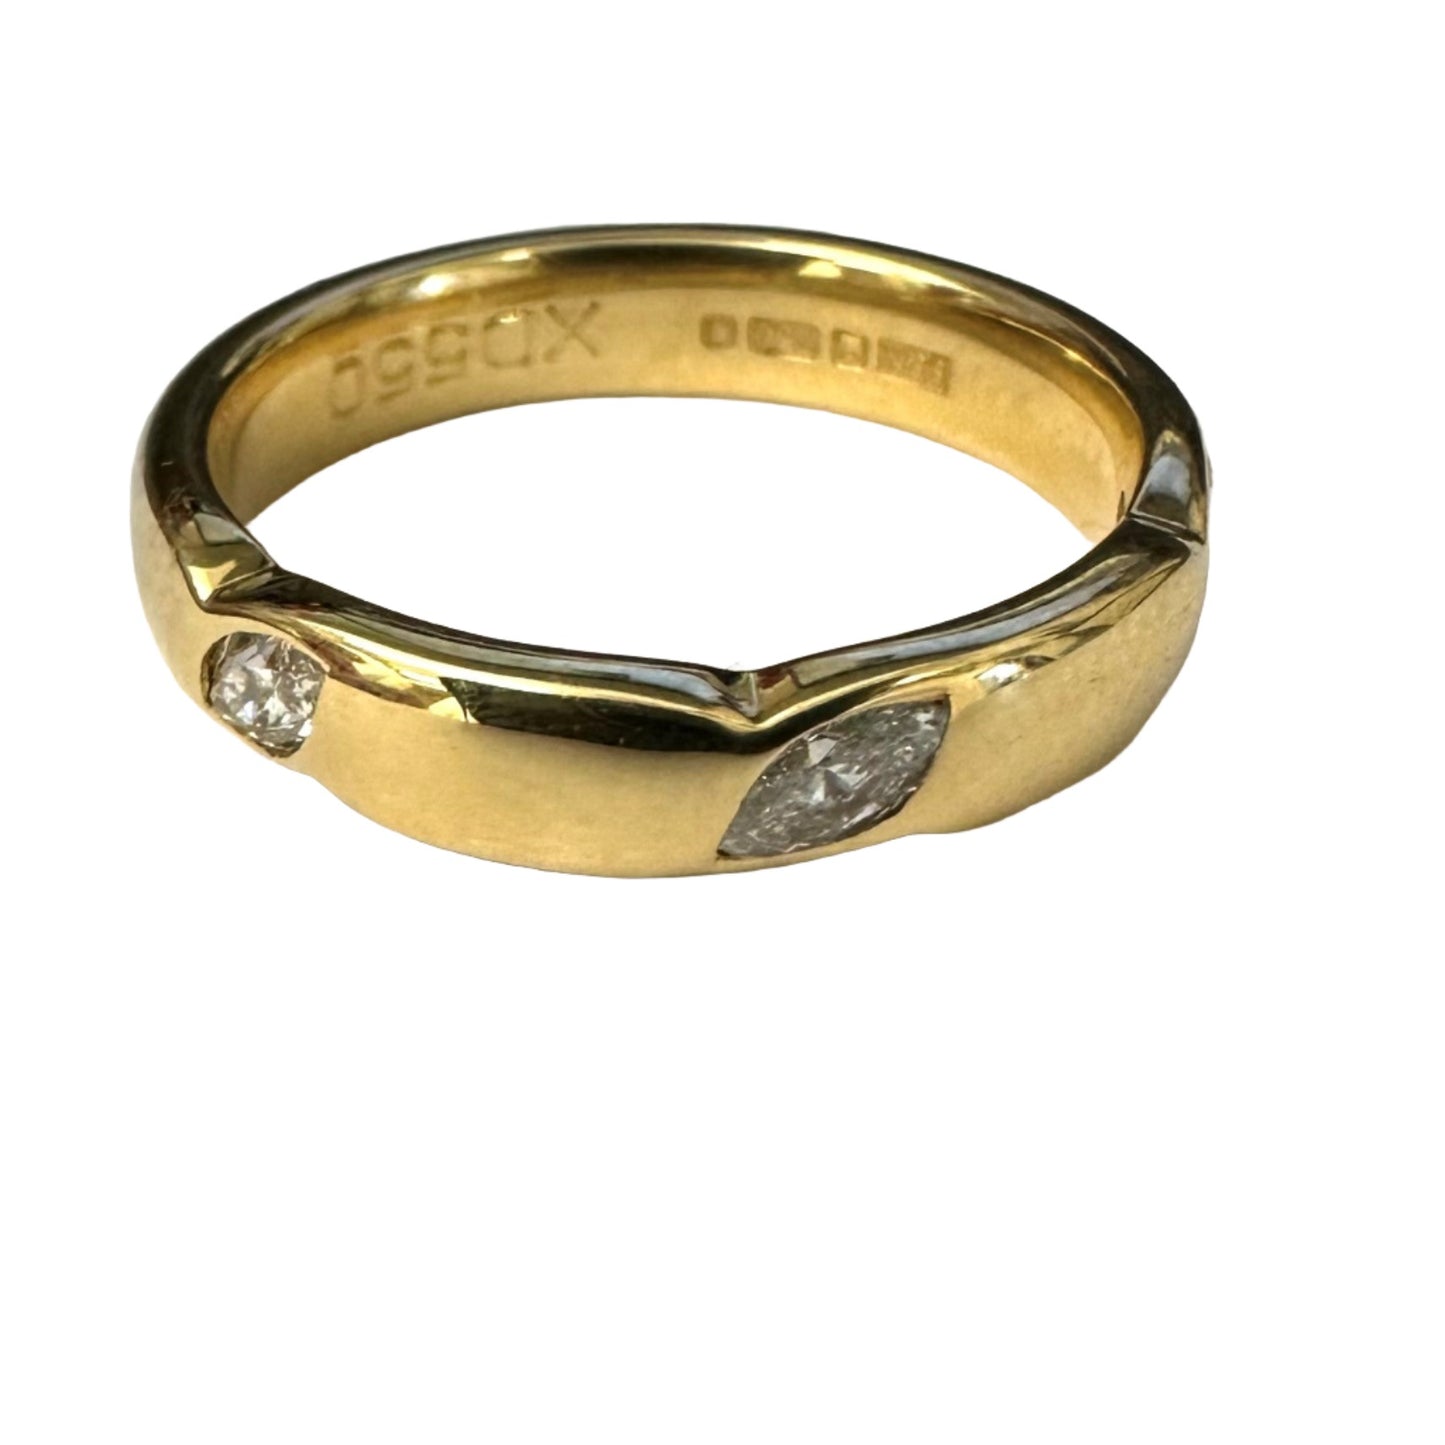 Exquisite 4.0mm Marquise Cut Diamond Gold Band"